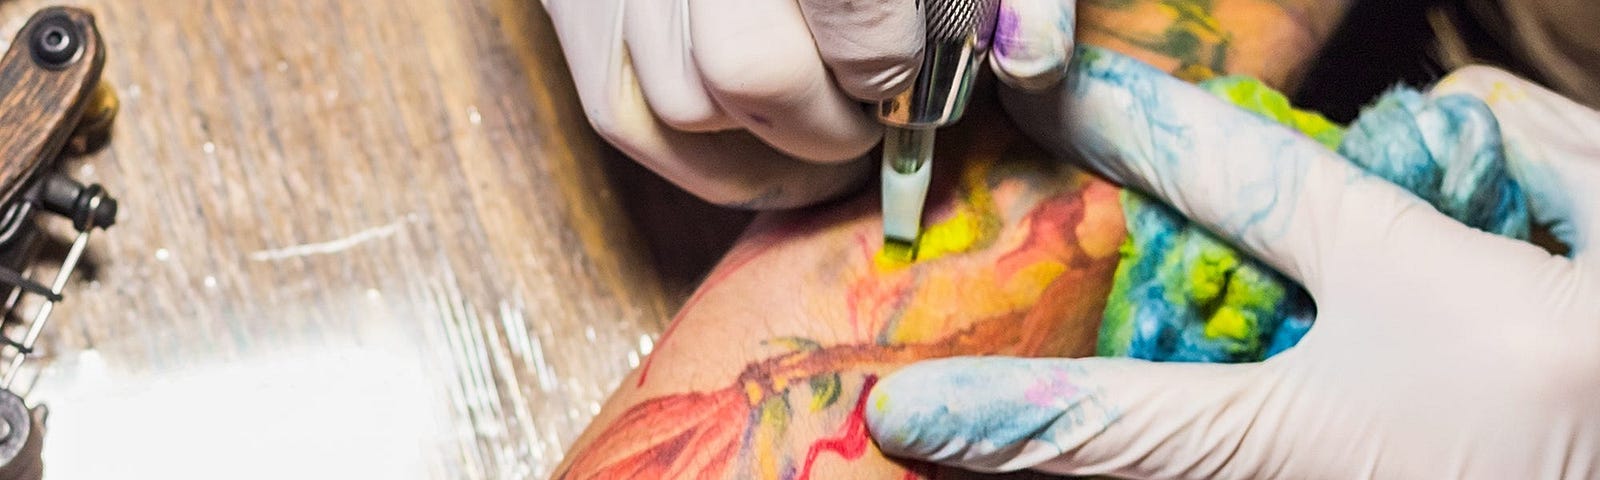 A person tattooing someone’s arm.